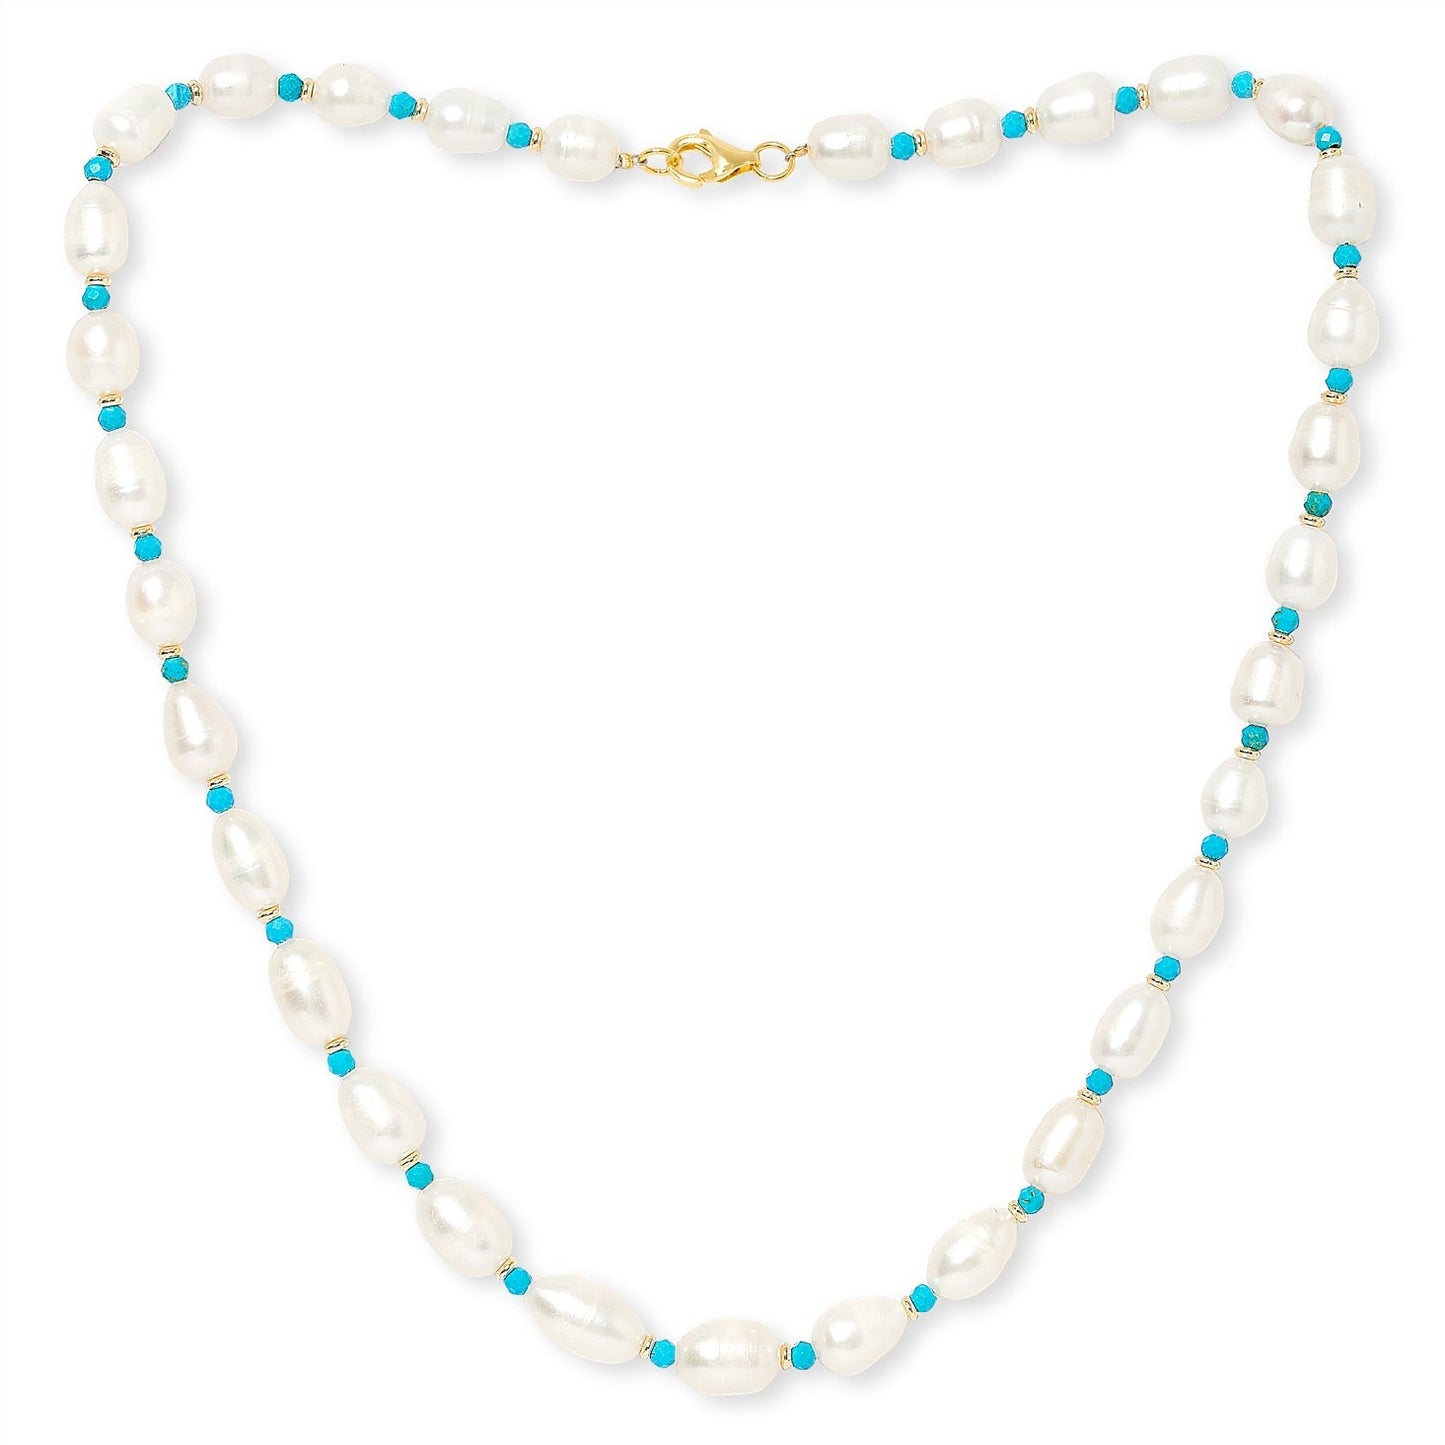 Nova oval baroque cultured freshwater pearl necklace with turquoise & gold beads